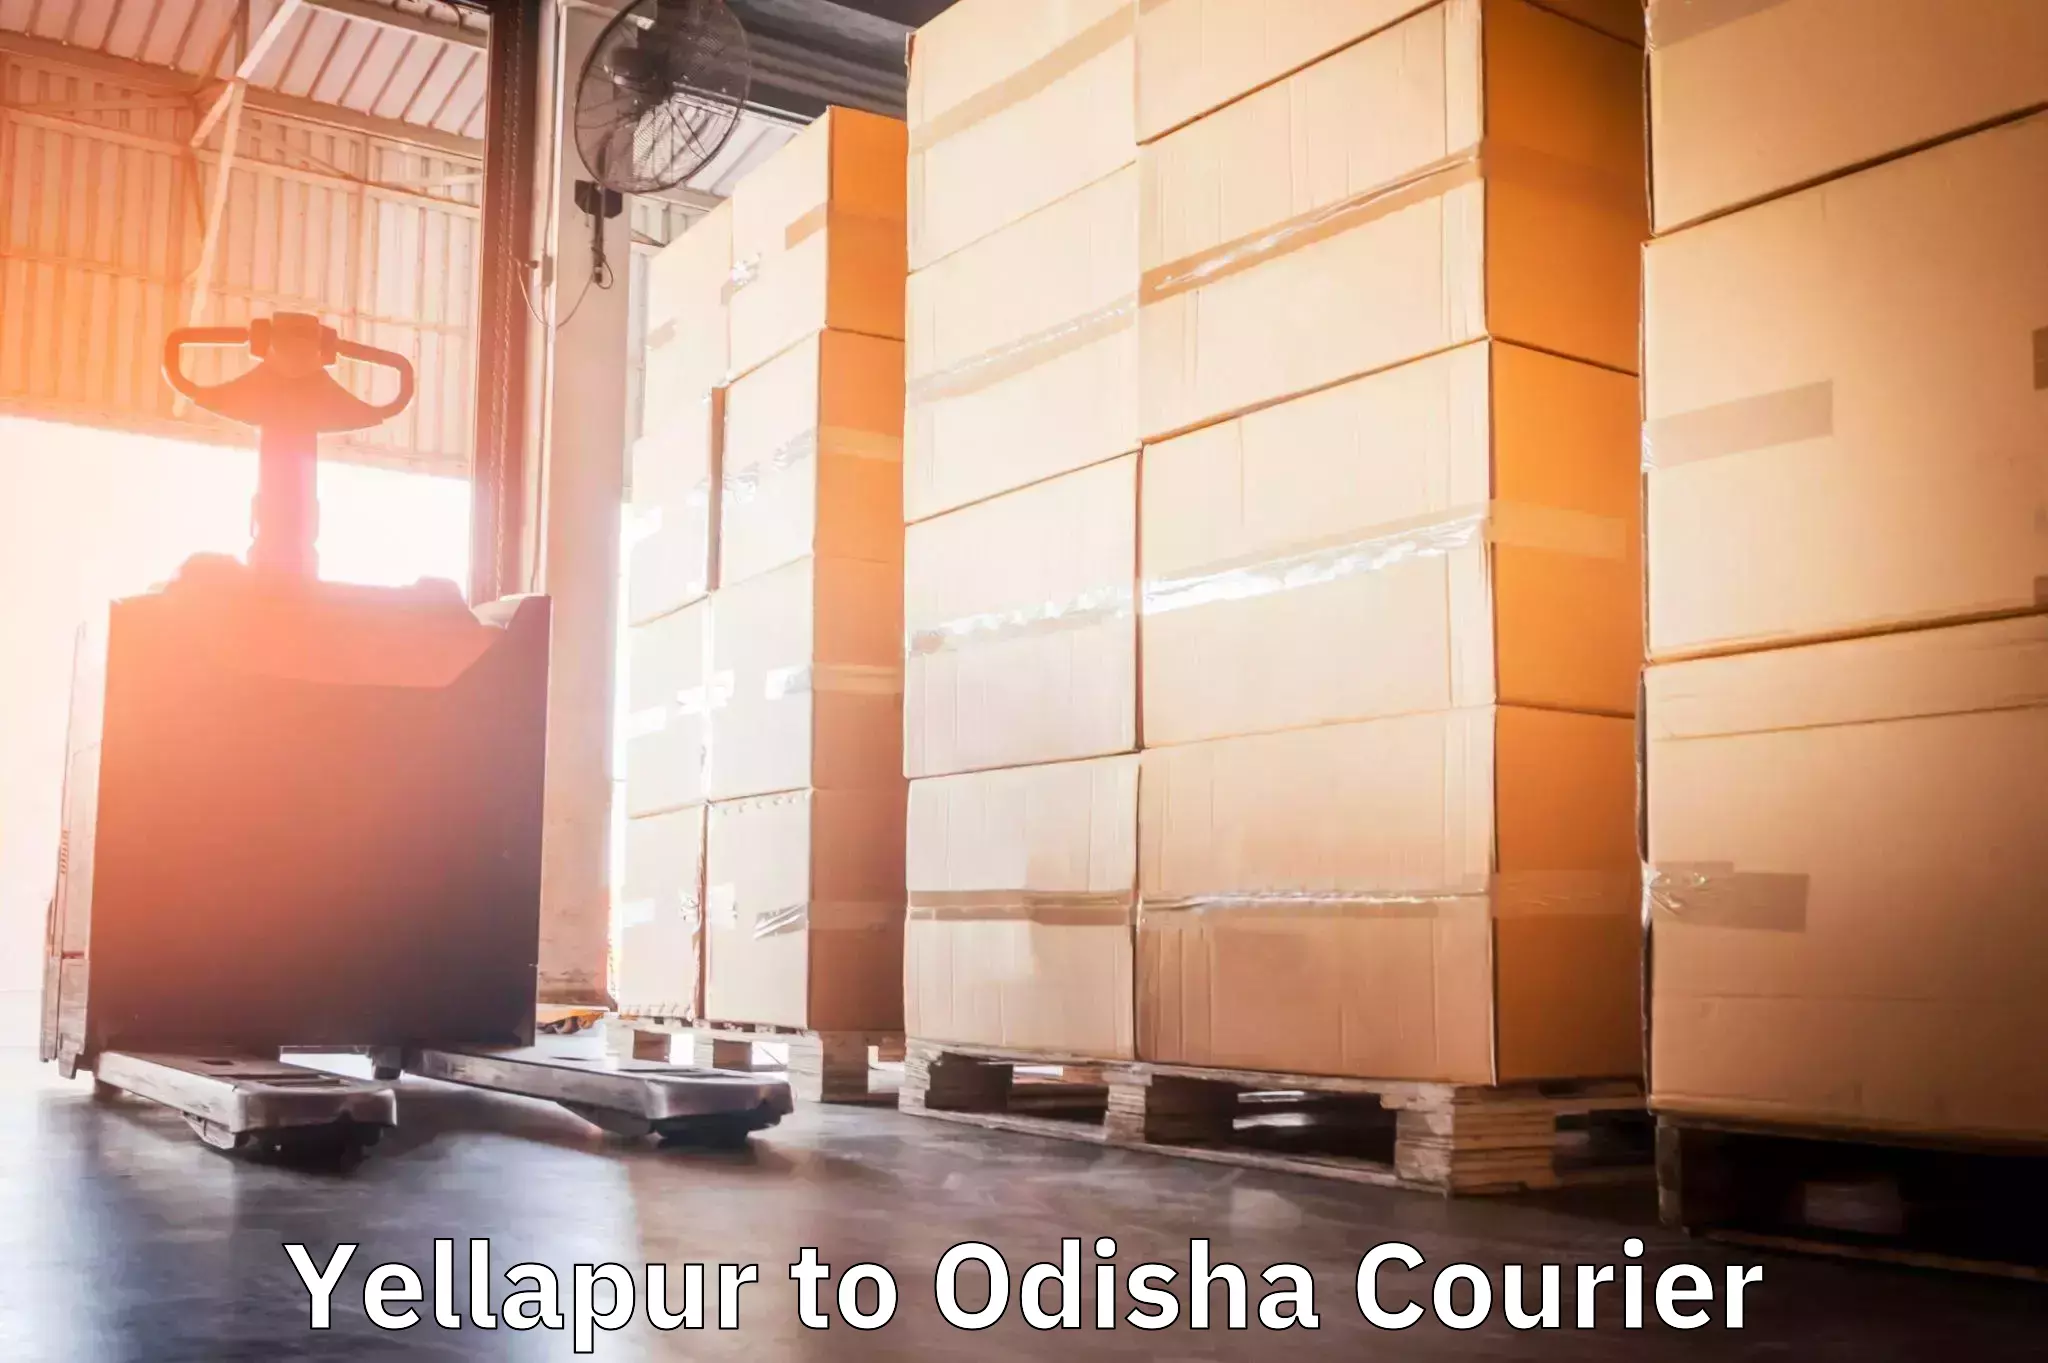 Sustainable delivery practices Yellapur to Odisha